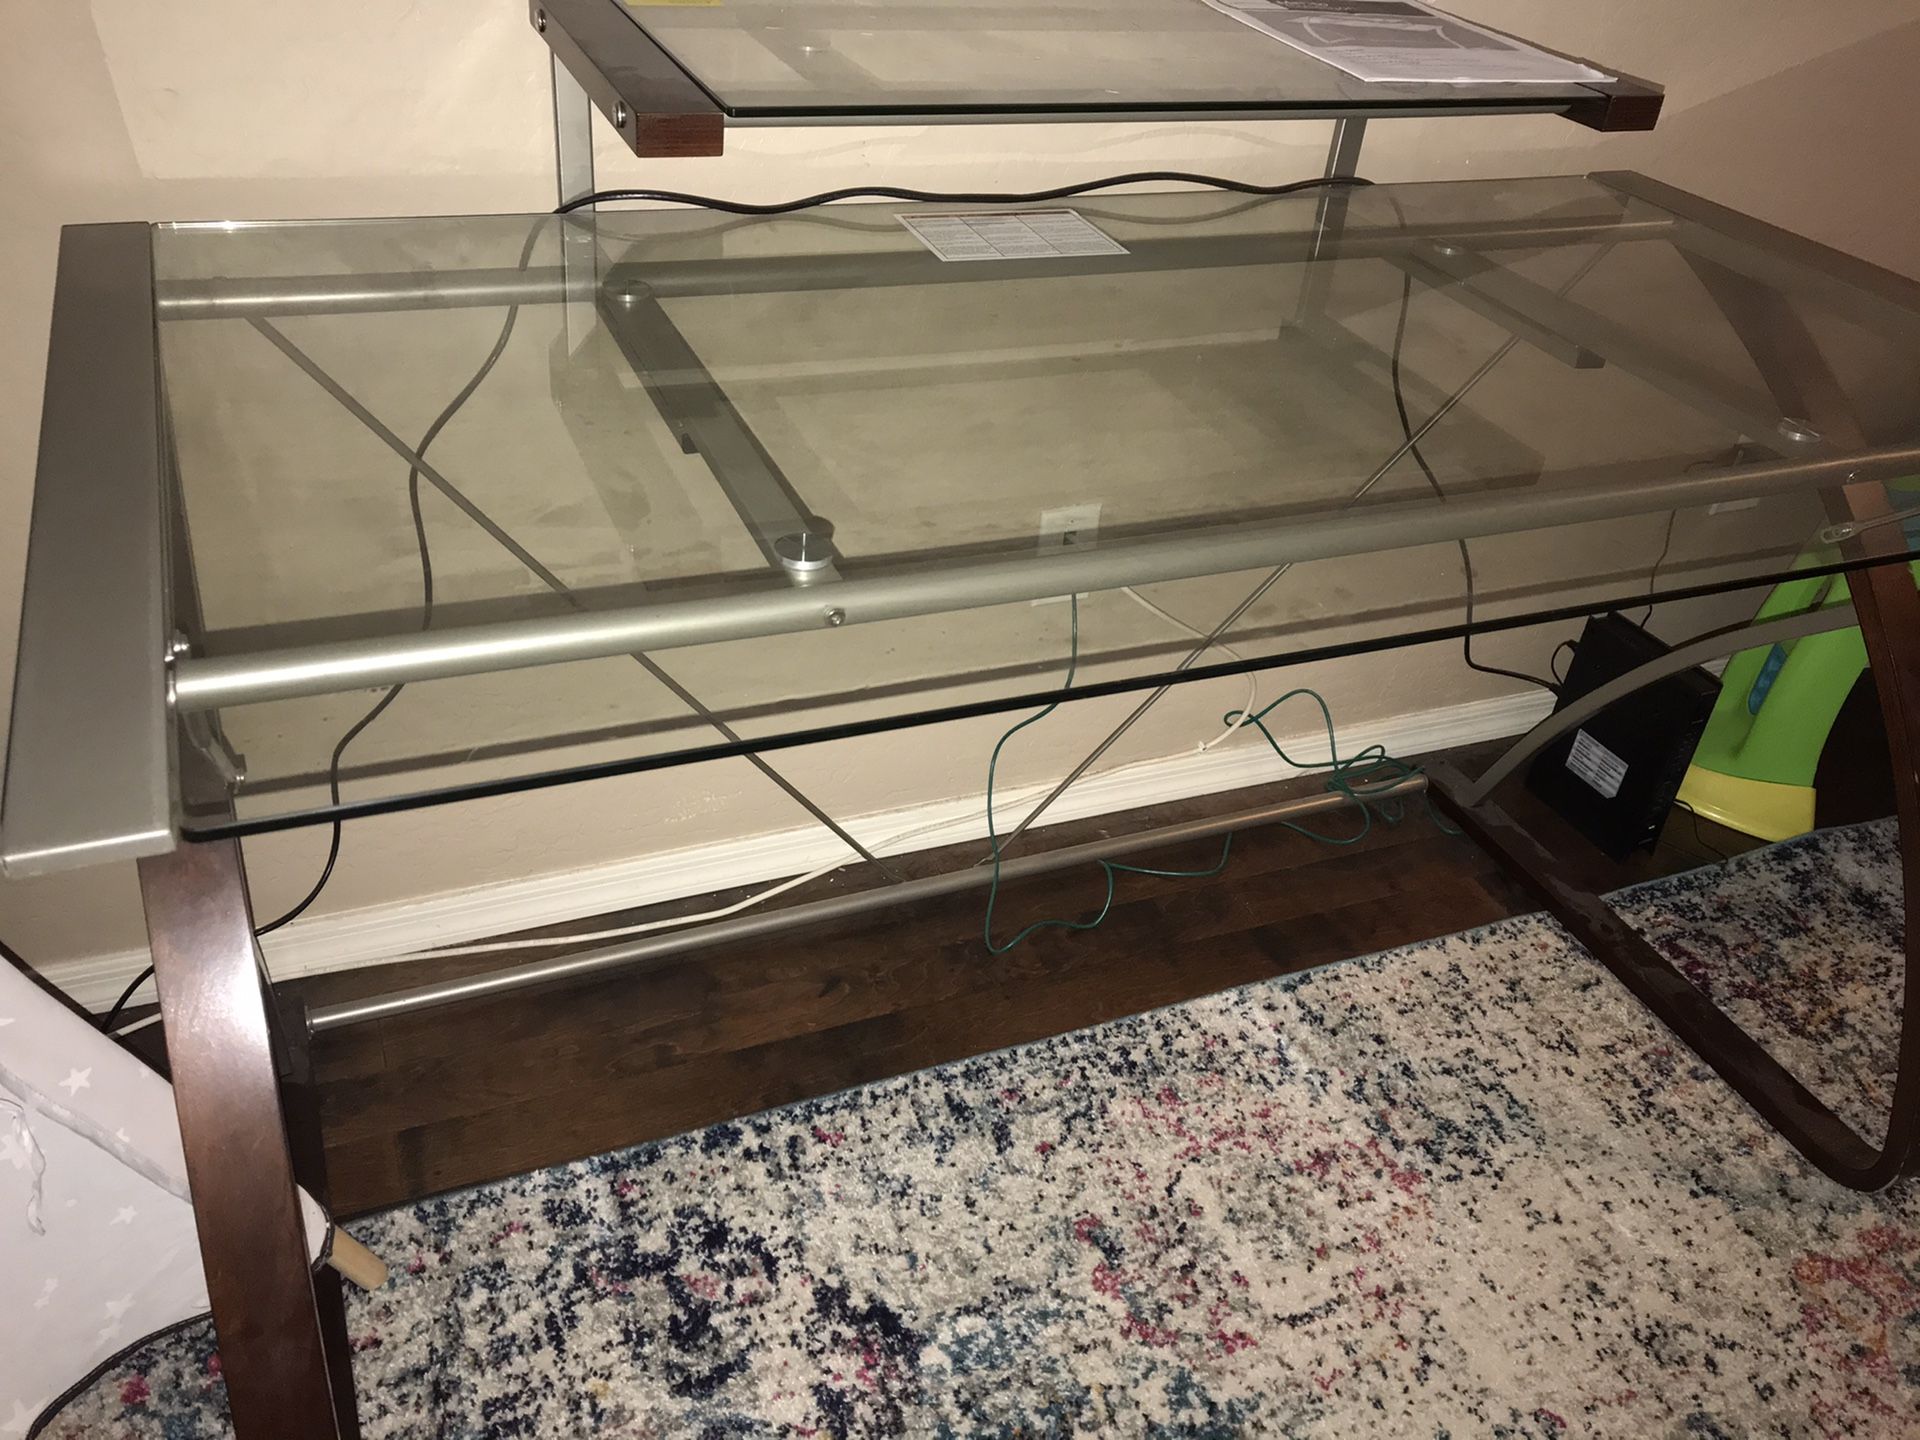 Glass desk - great condition $75 OBO. Dimensions: 55” in length, 27-5” wide, 36” tall.